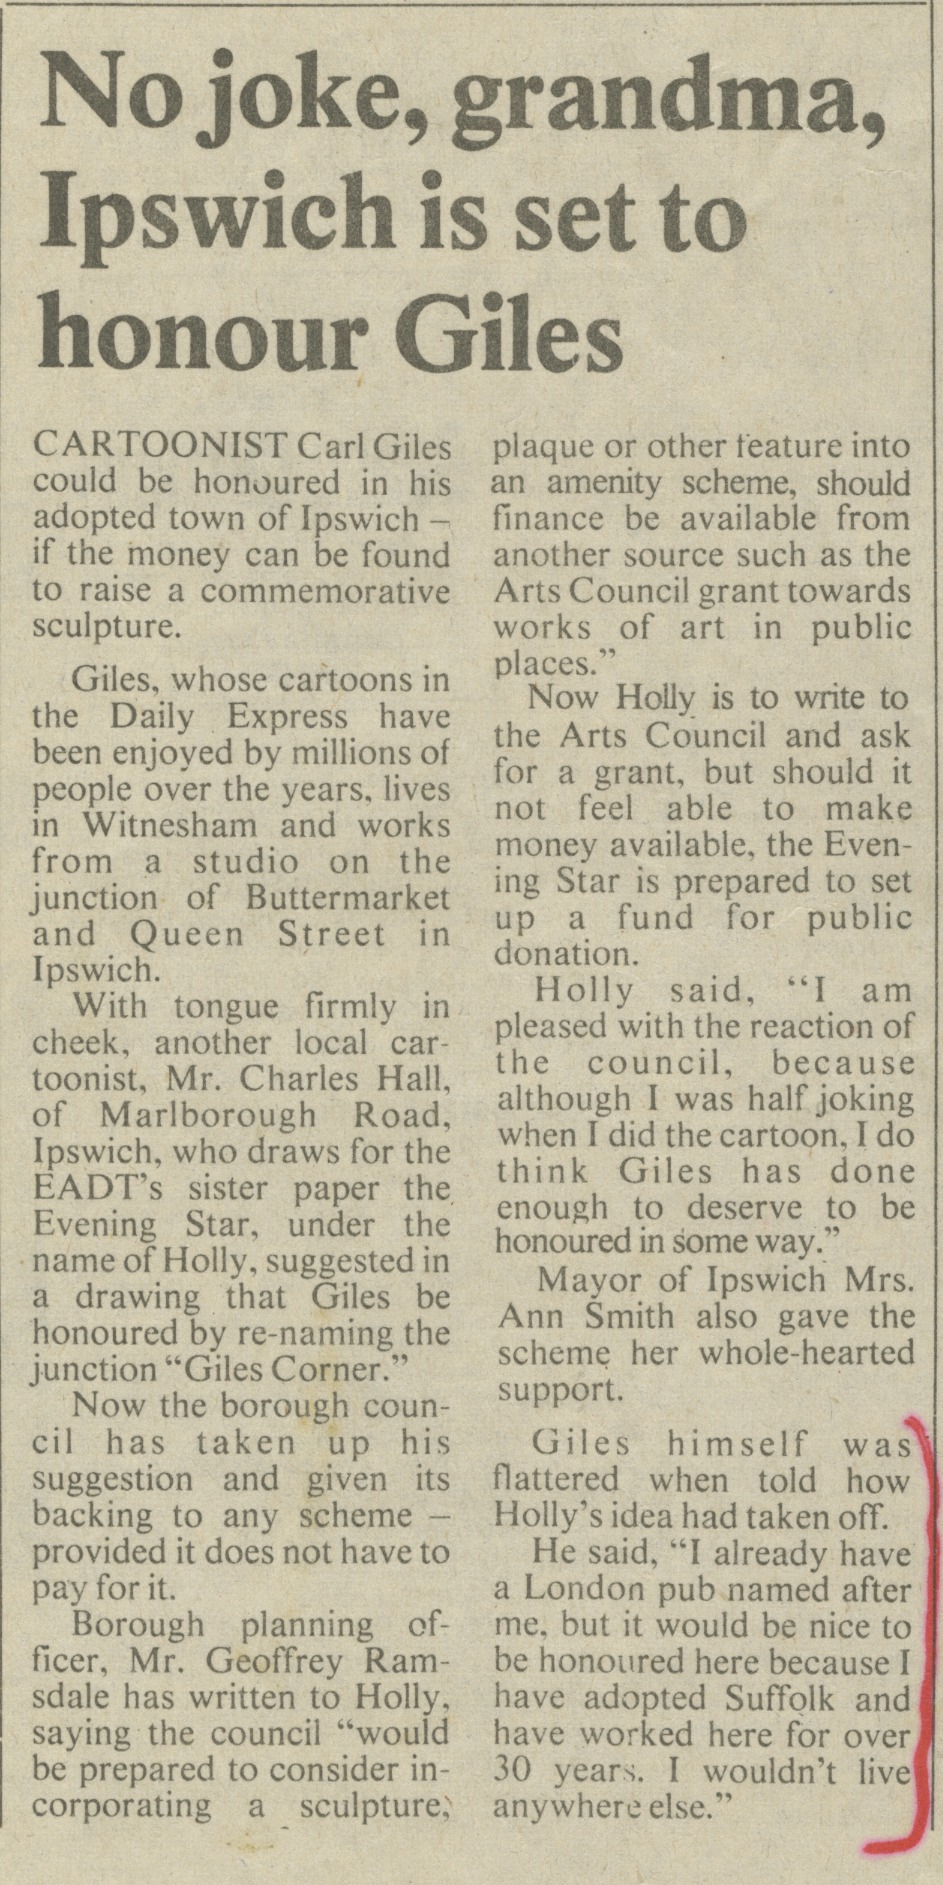 Article entitled 'No joke, grandma, Ipswich is set to honour Giles', about the proposed Giles statue in Ipswich - East Anglian Daily Times, 6 June 1981 (Image ref: GAPA0075)